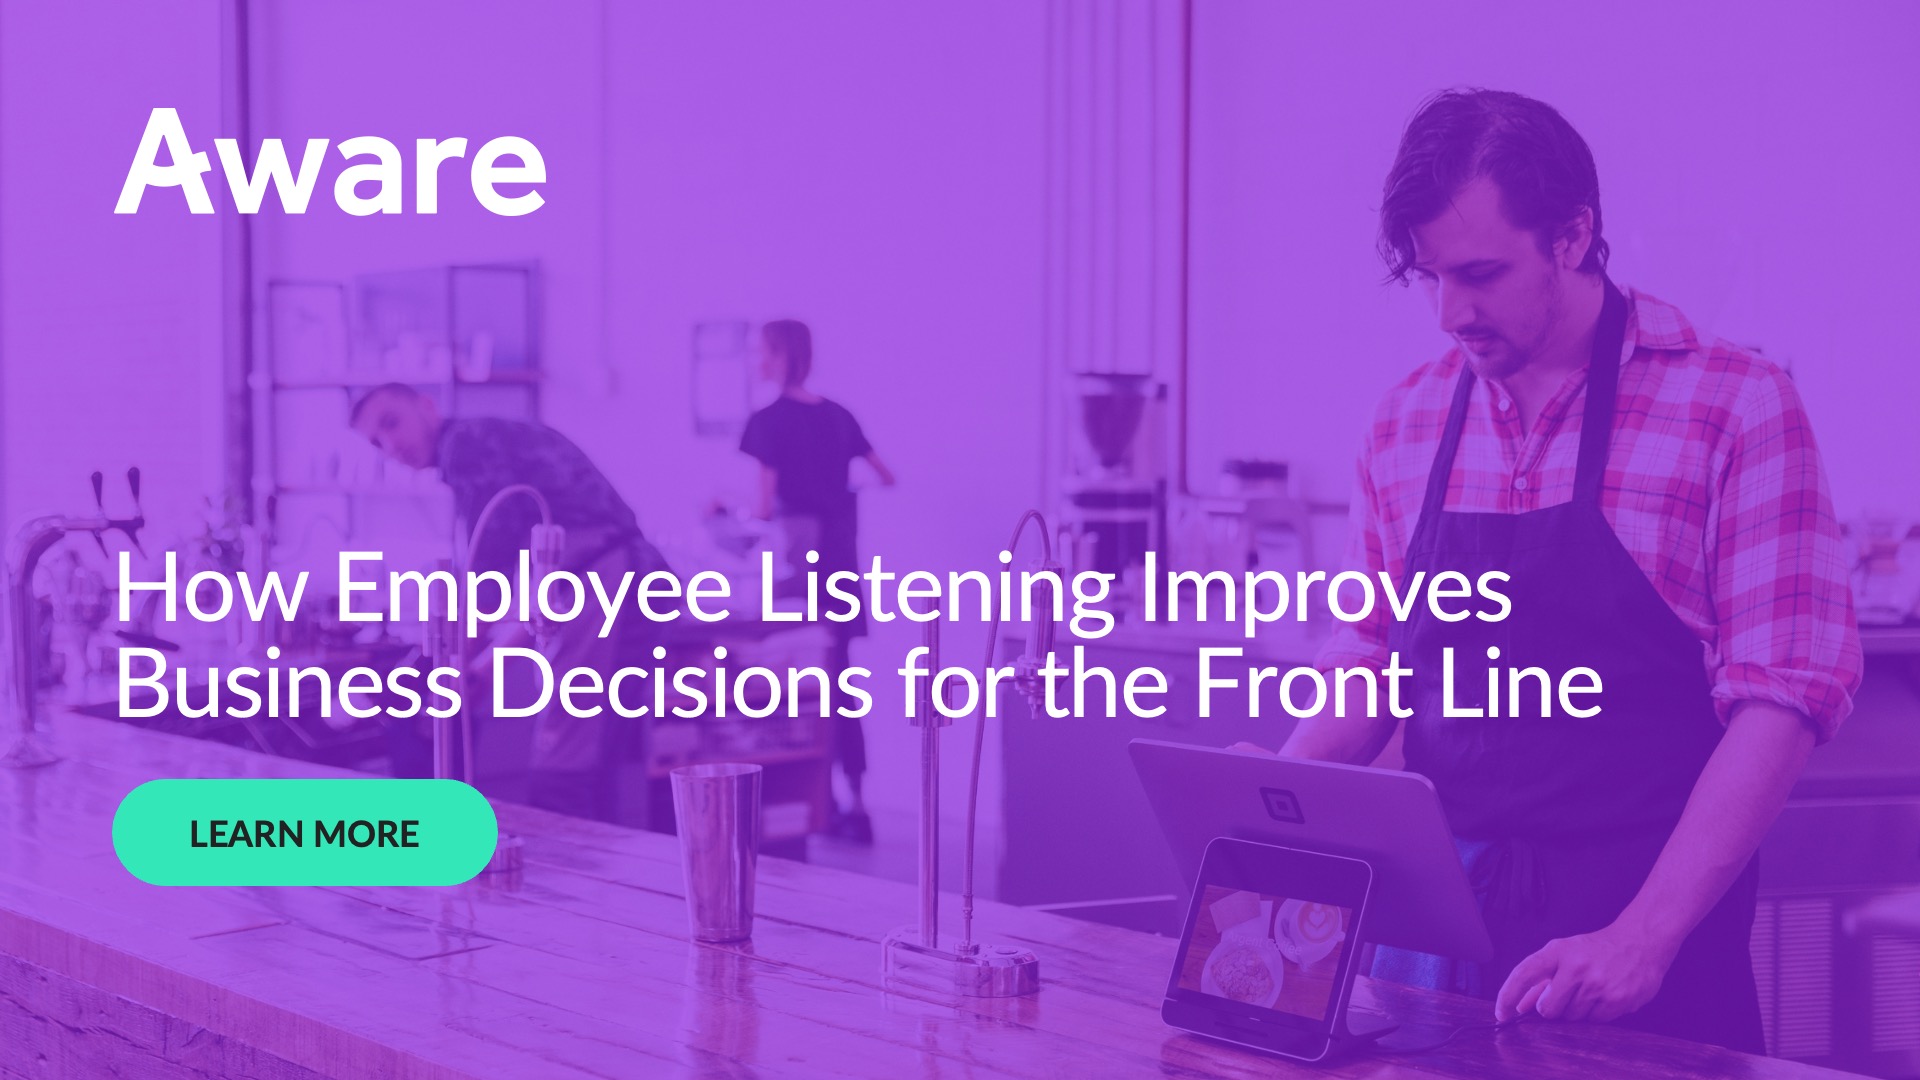 How Employee Listening Improves Business Decisions for the Front Line